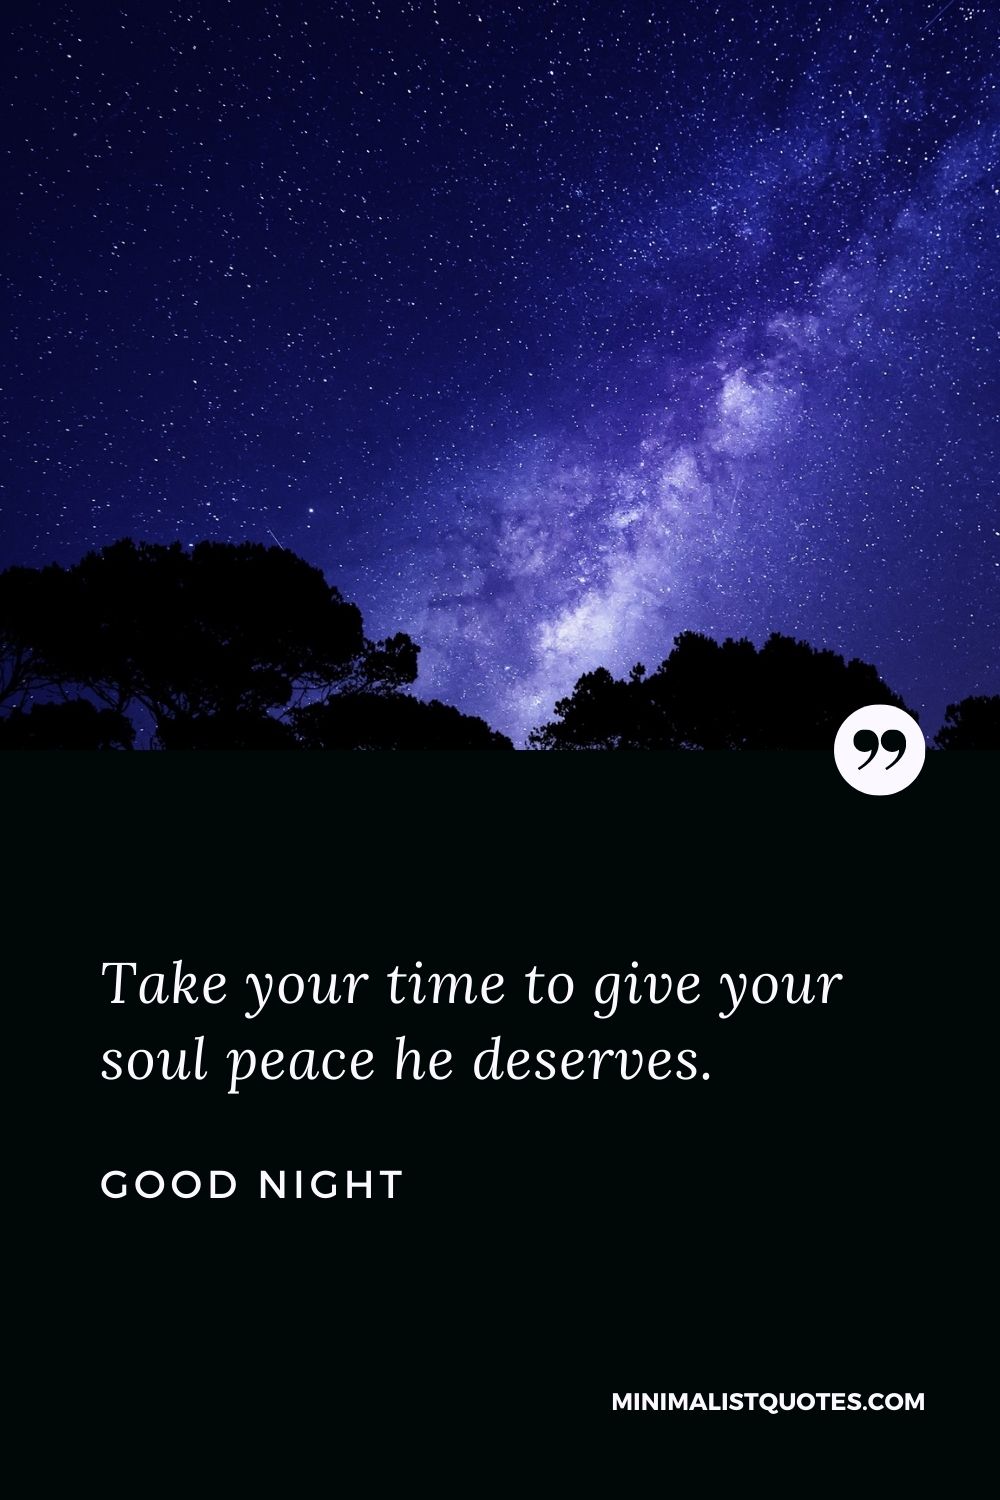 Take your time to give your soul peace he deserves. Good Night!